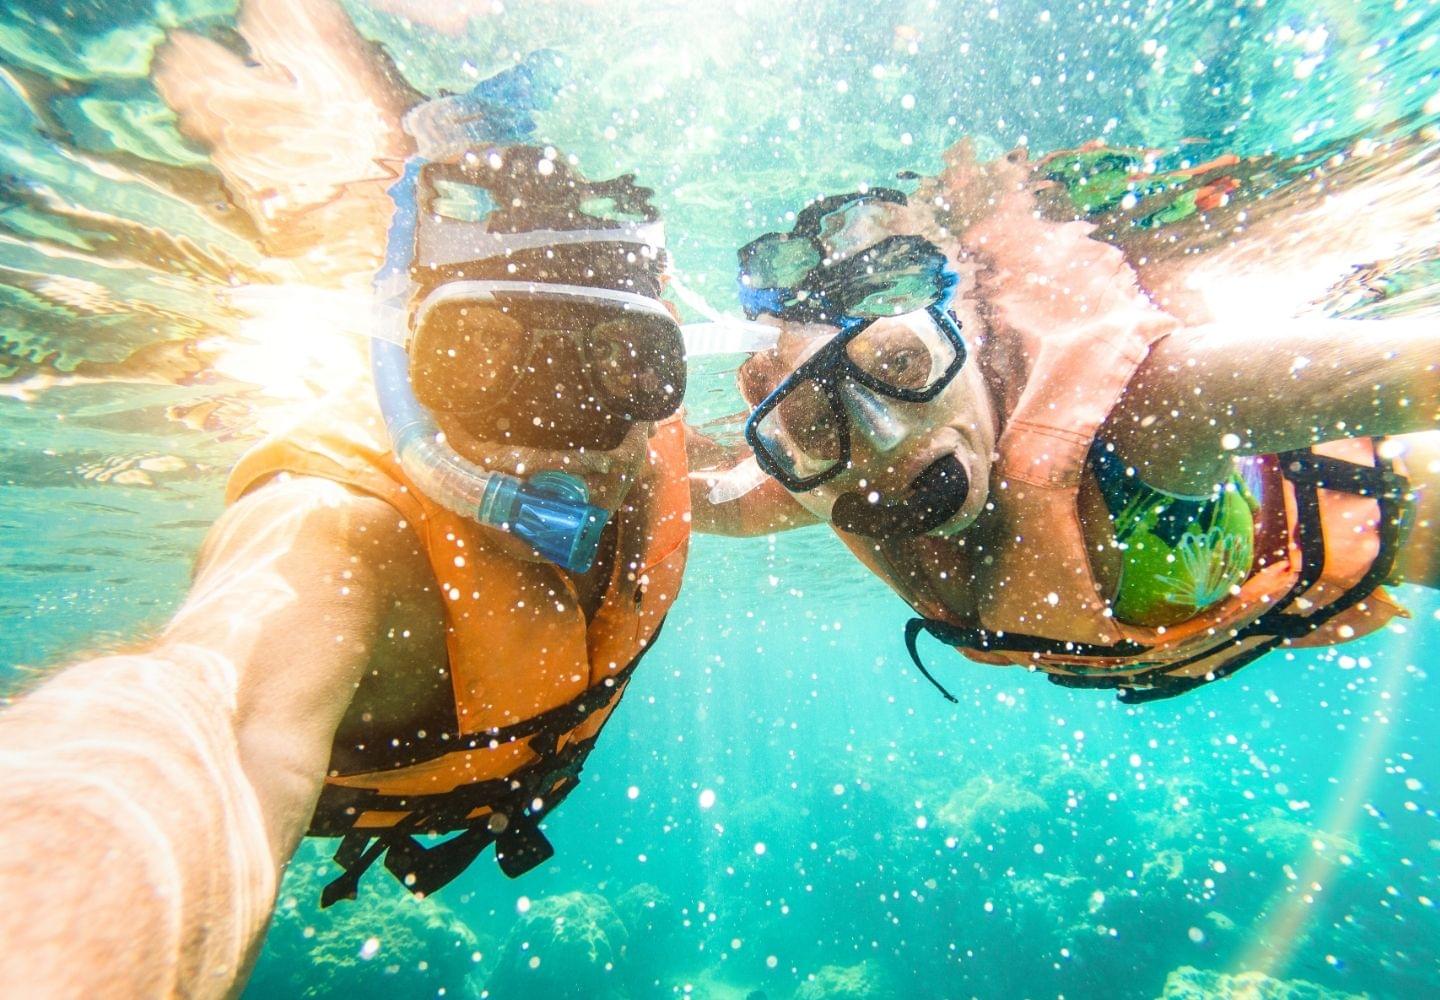 snorkeling couple with life jackets on in water